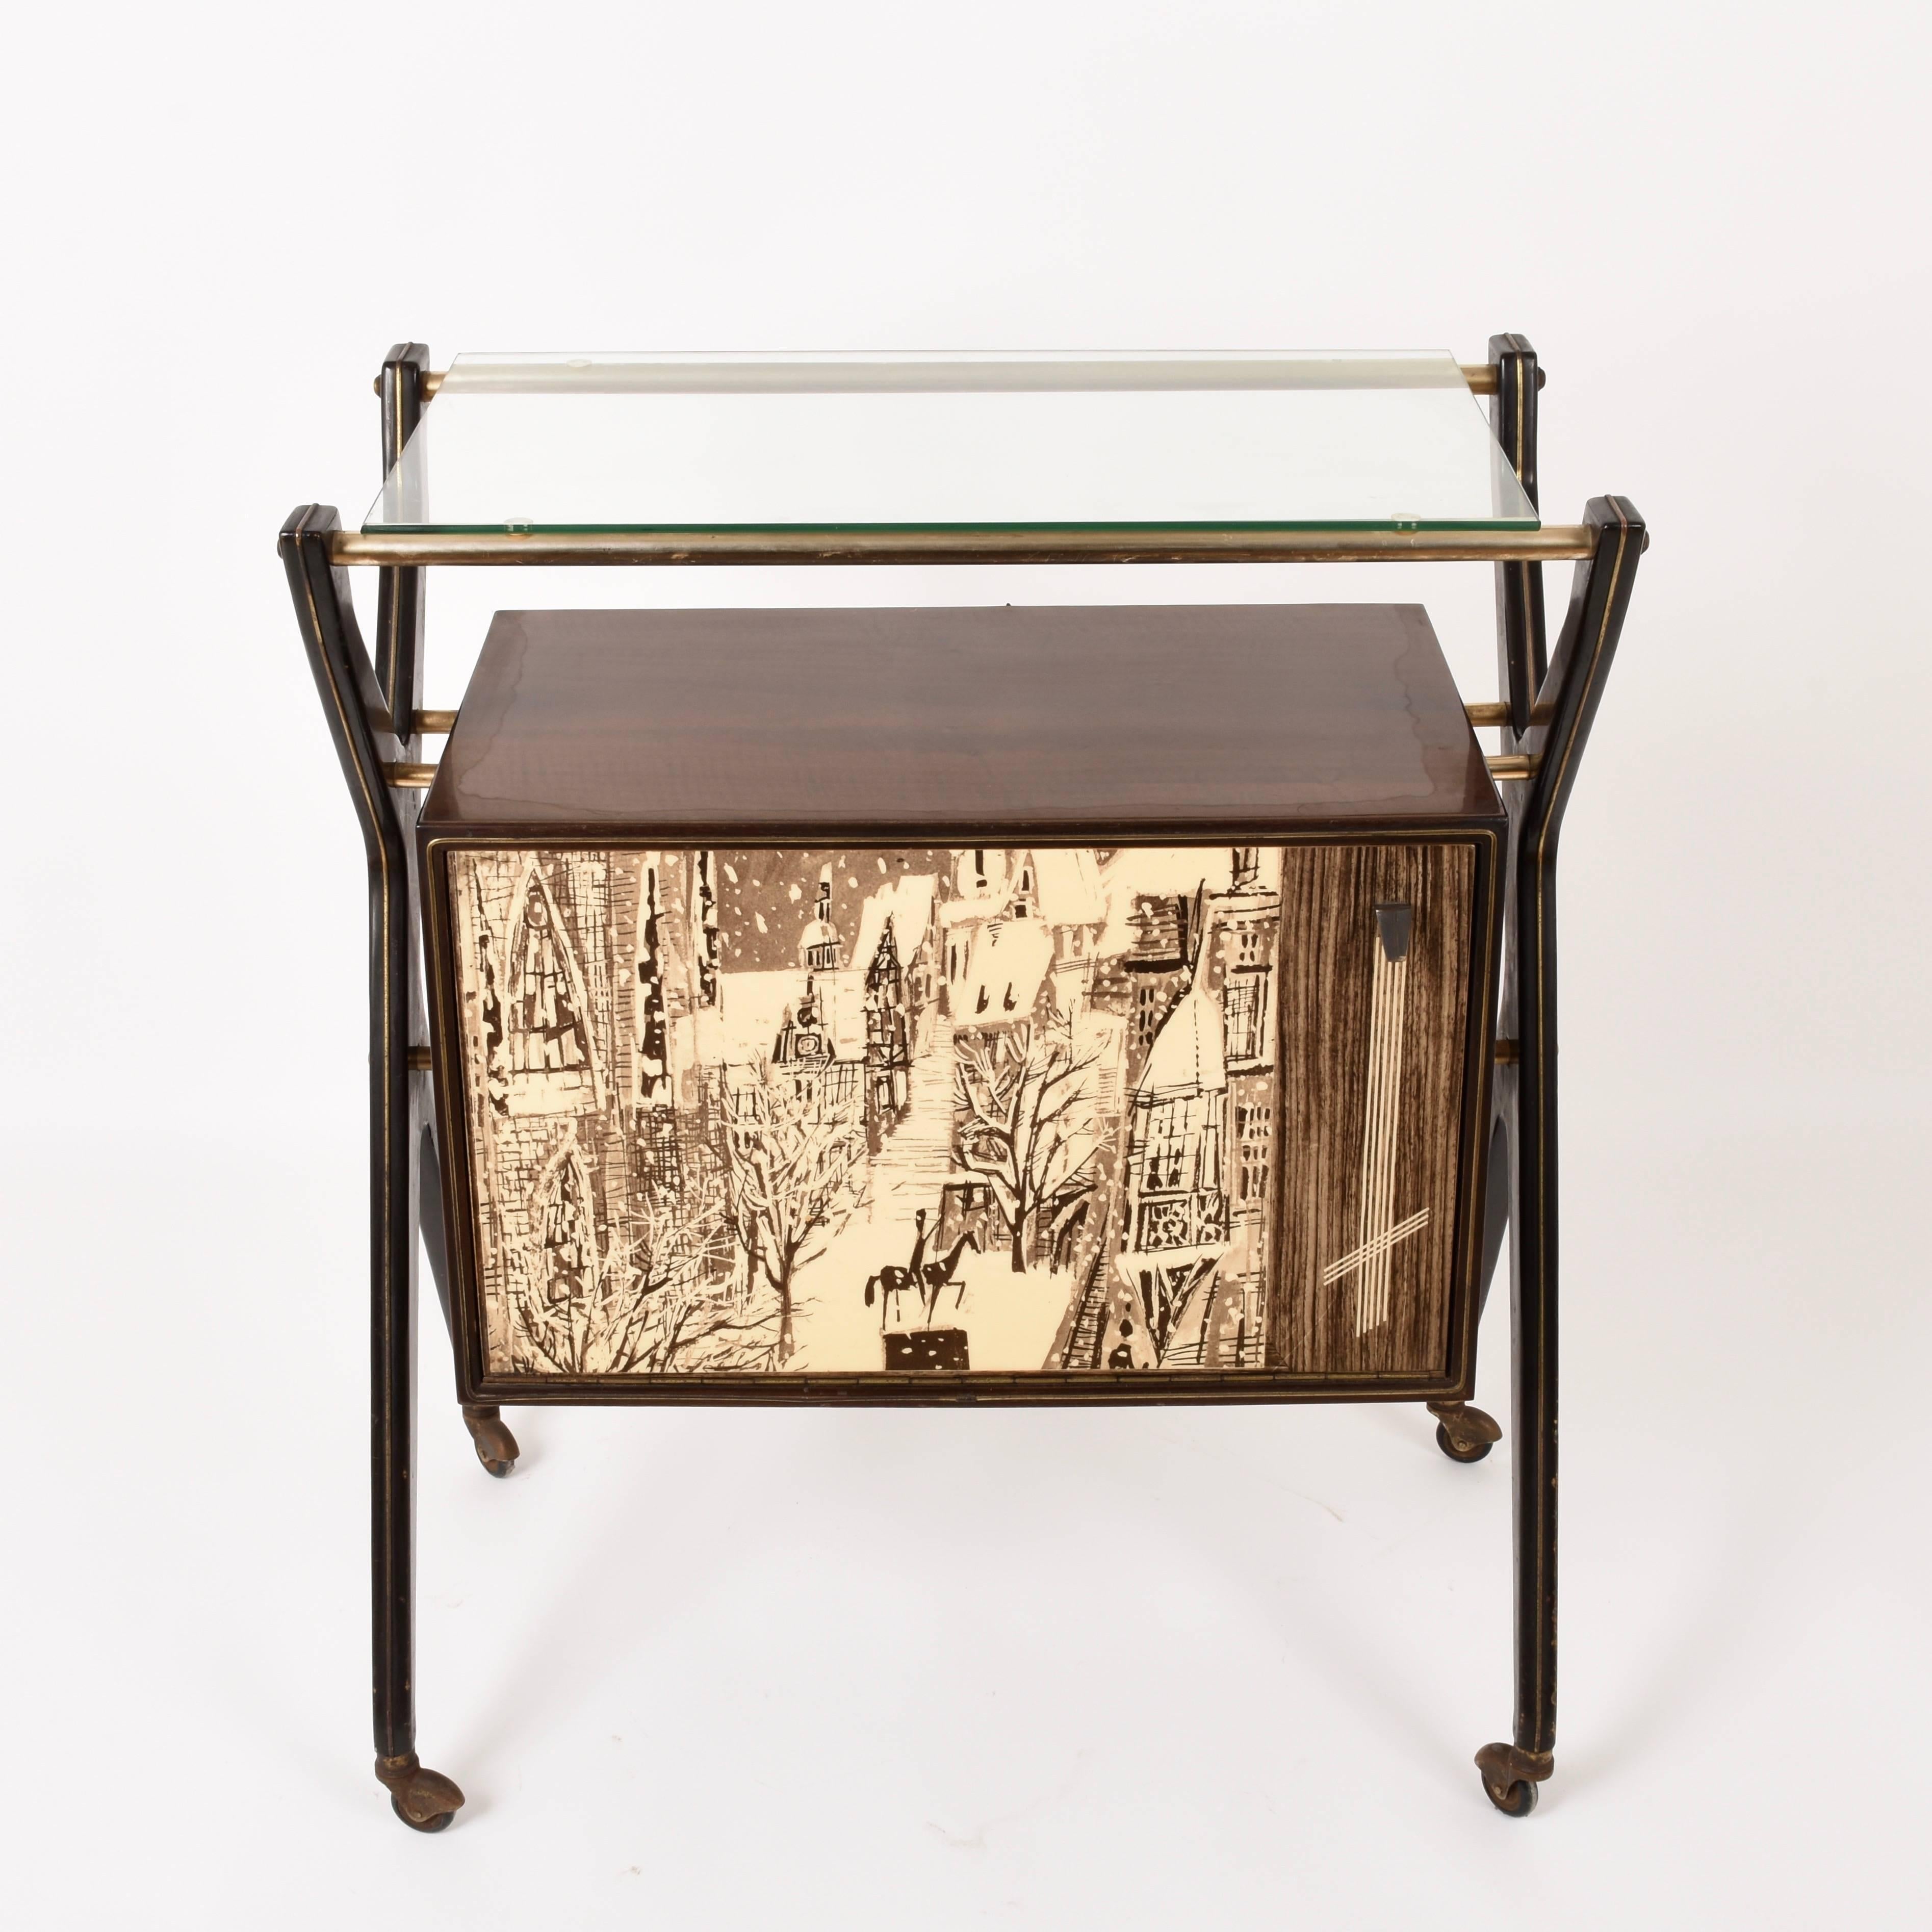 Italian Attributed to Cesare Lacca Dry Bar Trolley, Italy, 1950s